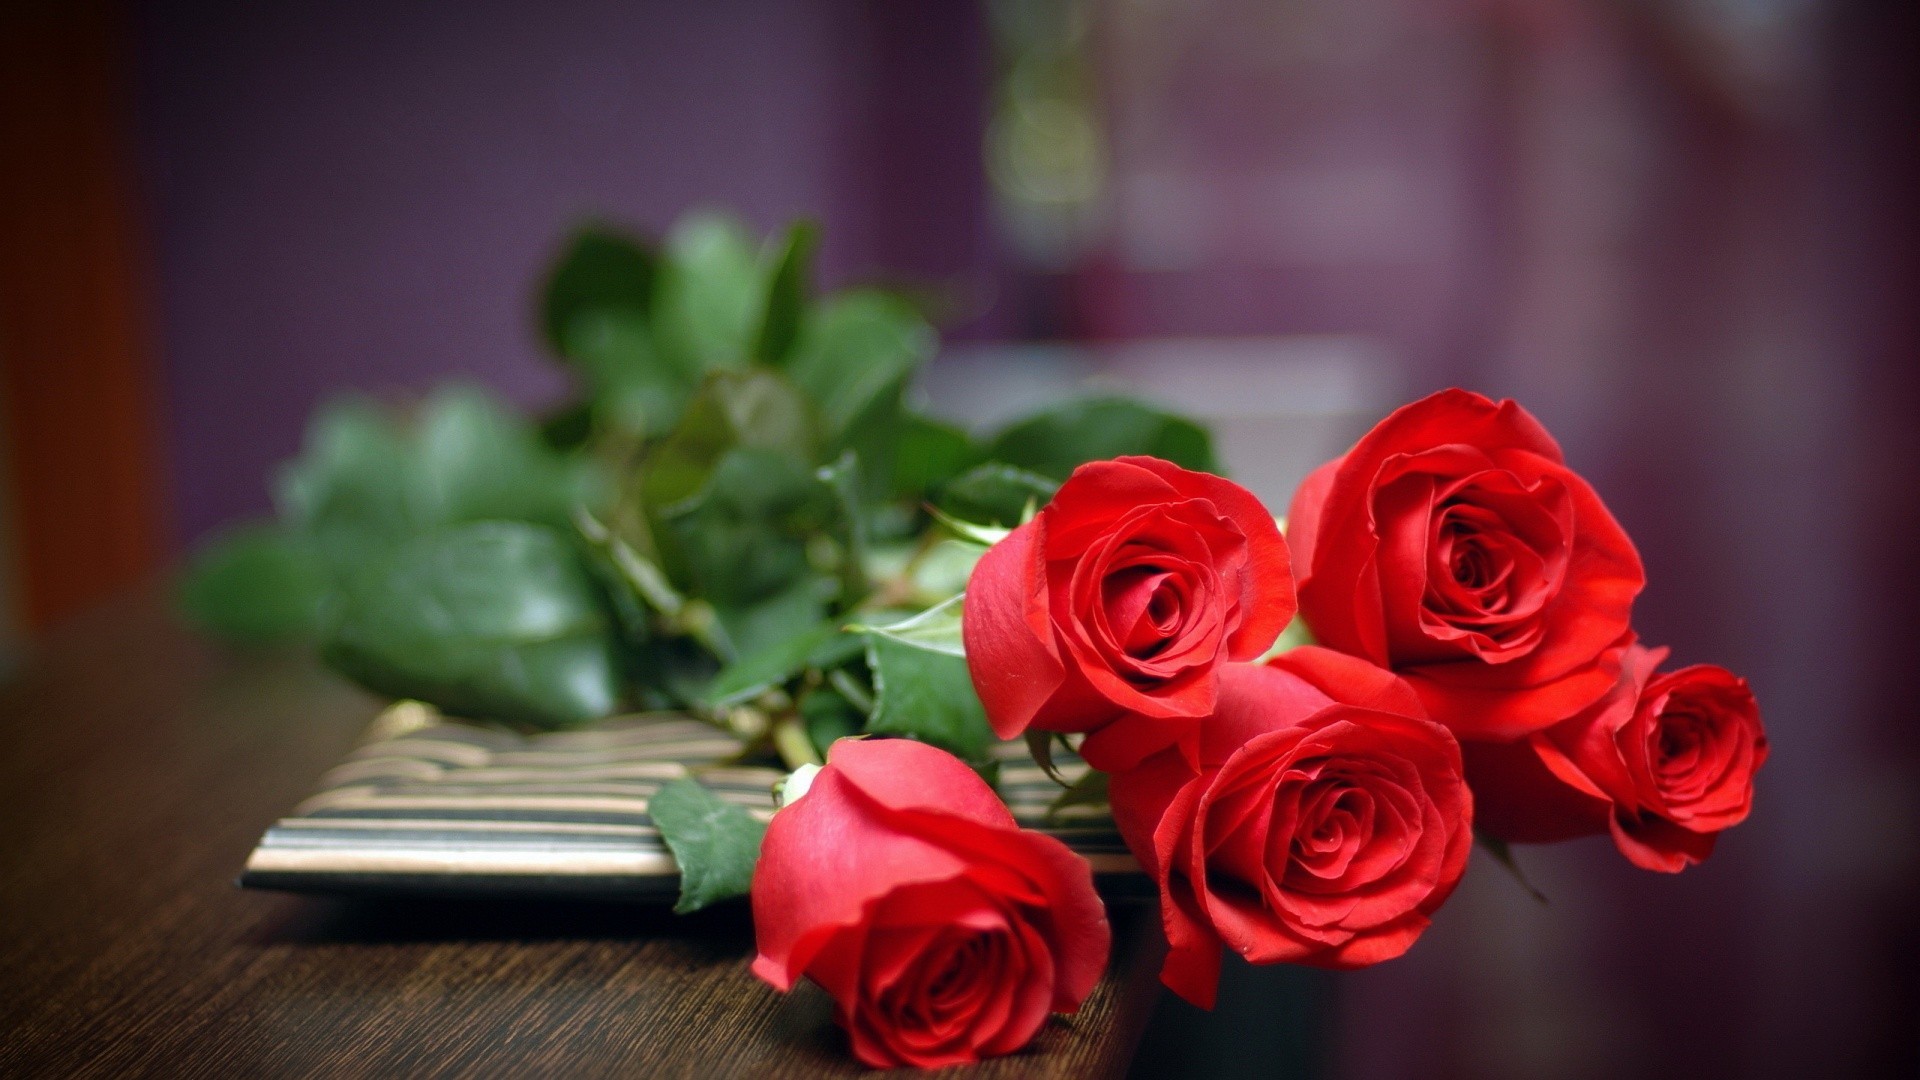 1920x1080 Red Rose Wallpaper HD pictures.